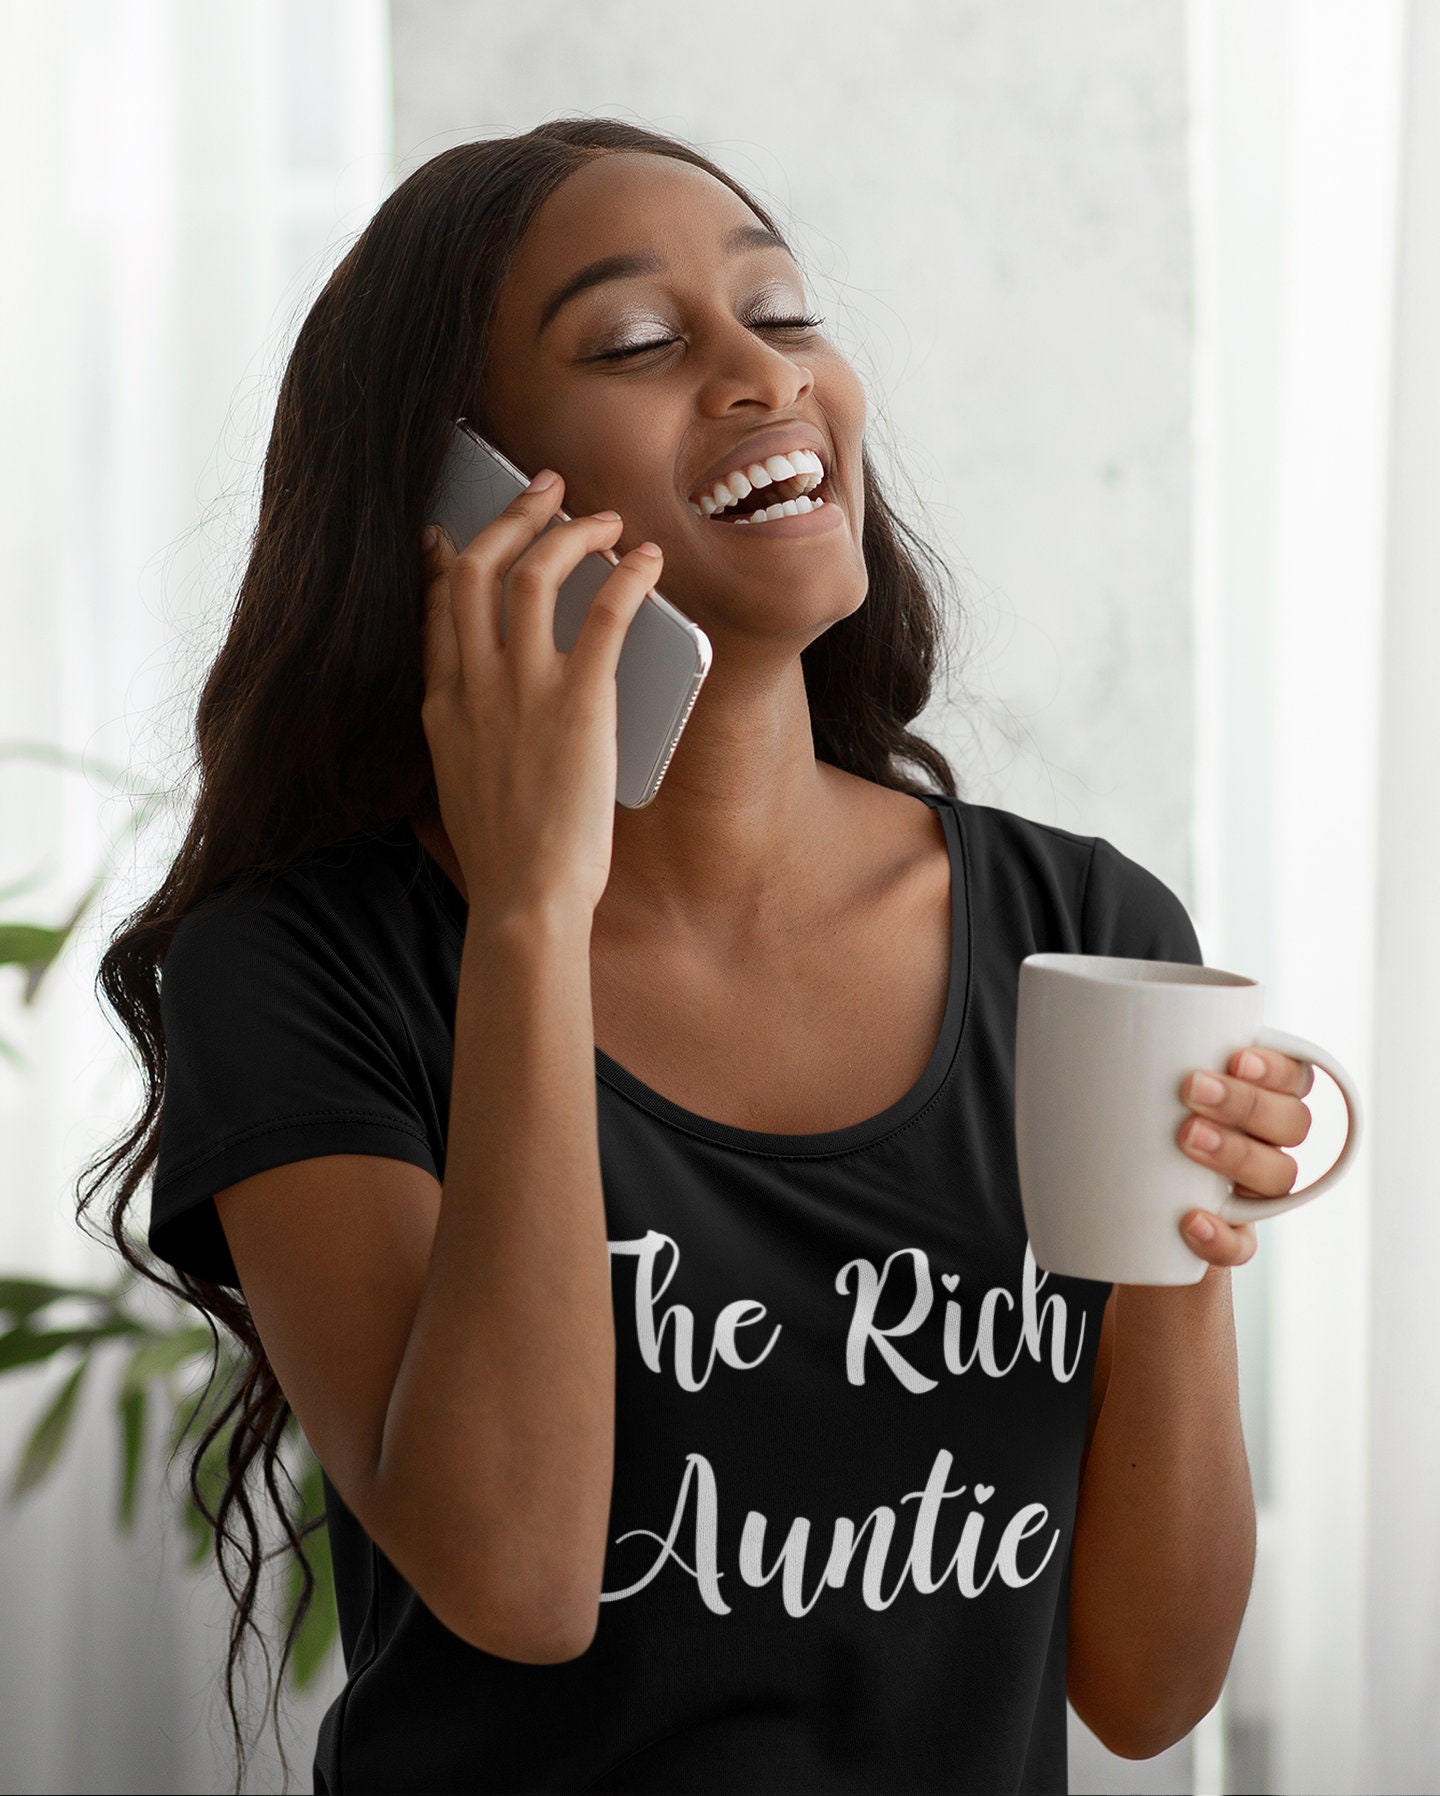 Aunt Shirt Favorite Aunt Tee High Quality Luxury Tee Rich Auntie Shirt Best Auntie Auntie Shirt